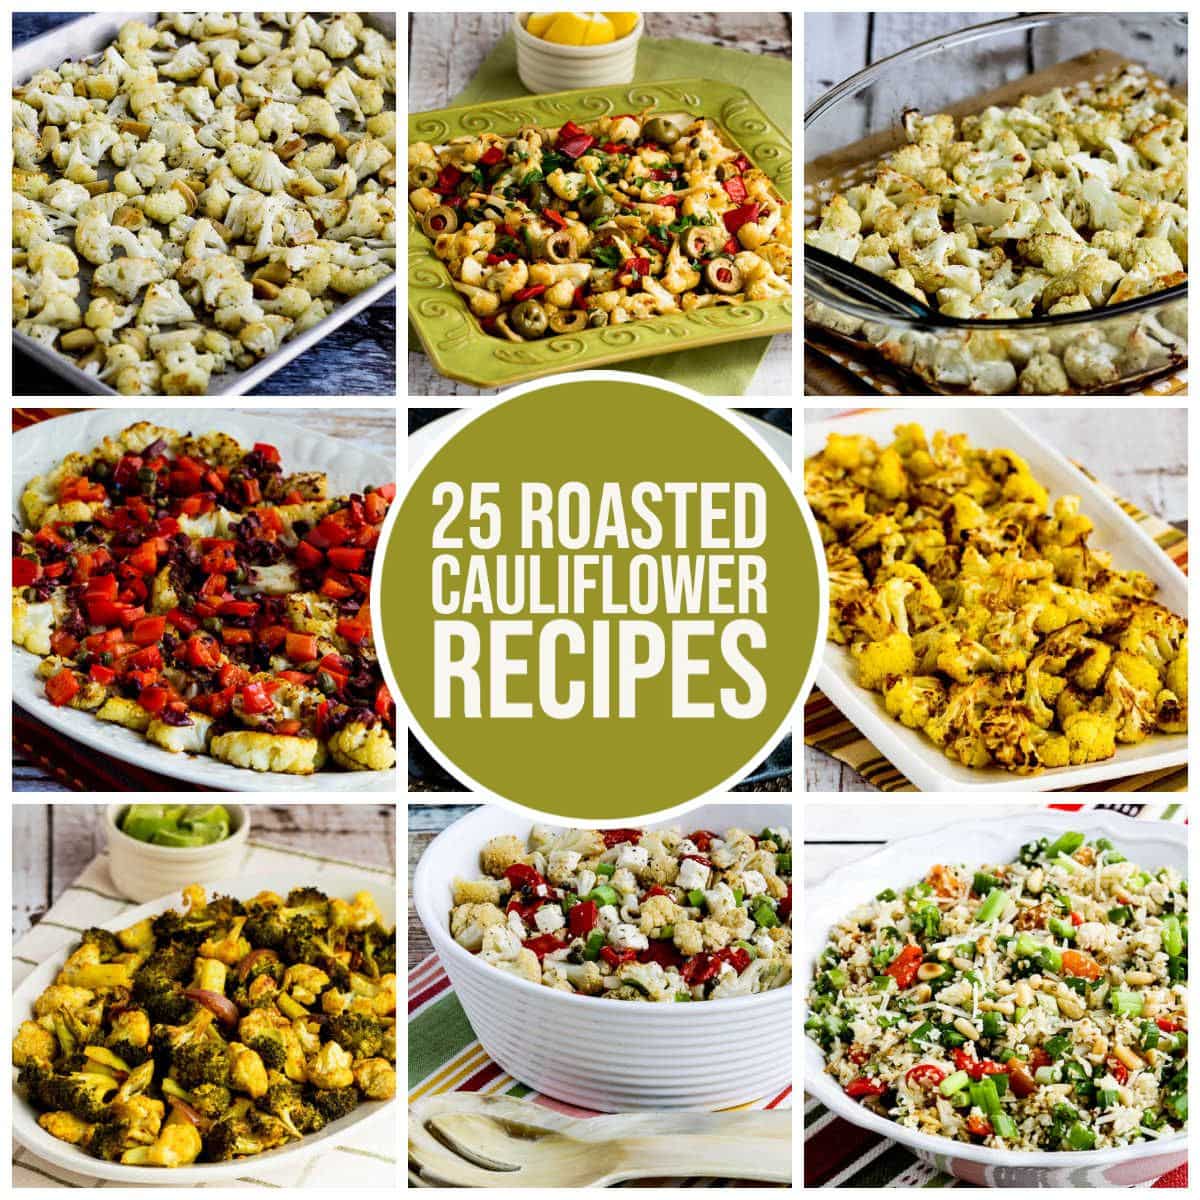 25 Roasted Cauliflower Recipes collage of featured recipes with text overlay